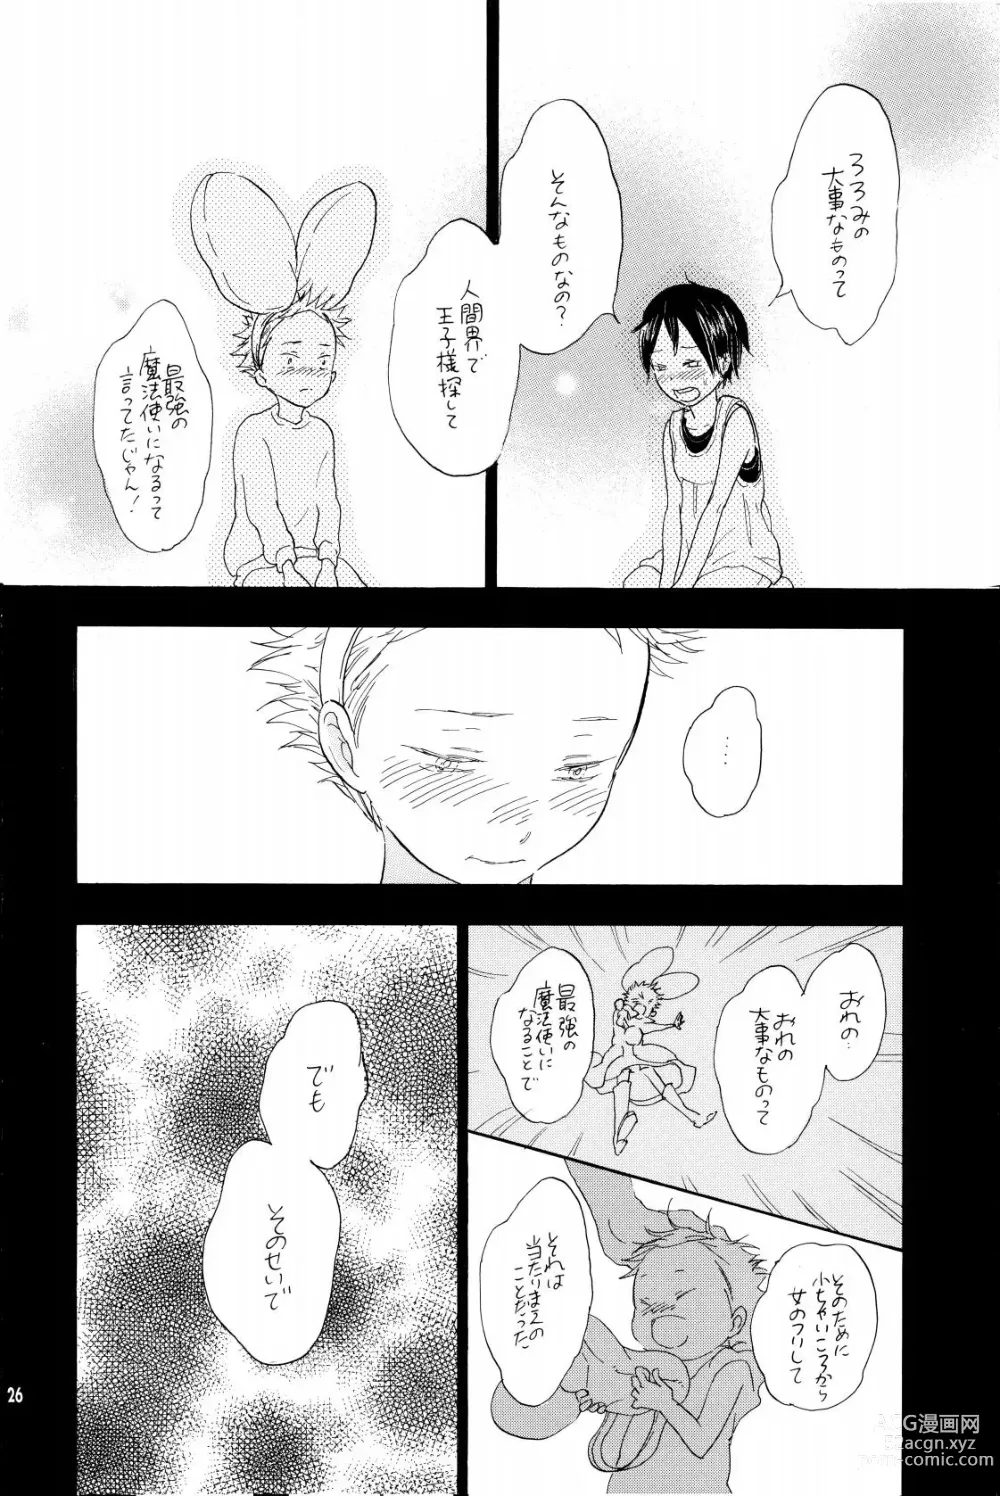 Page 25 of doujinshi your song